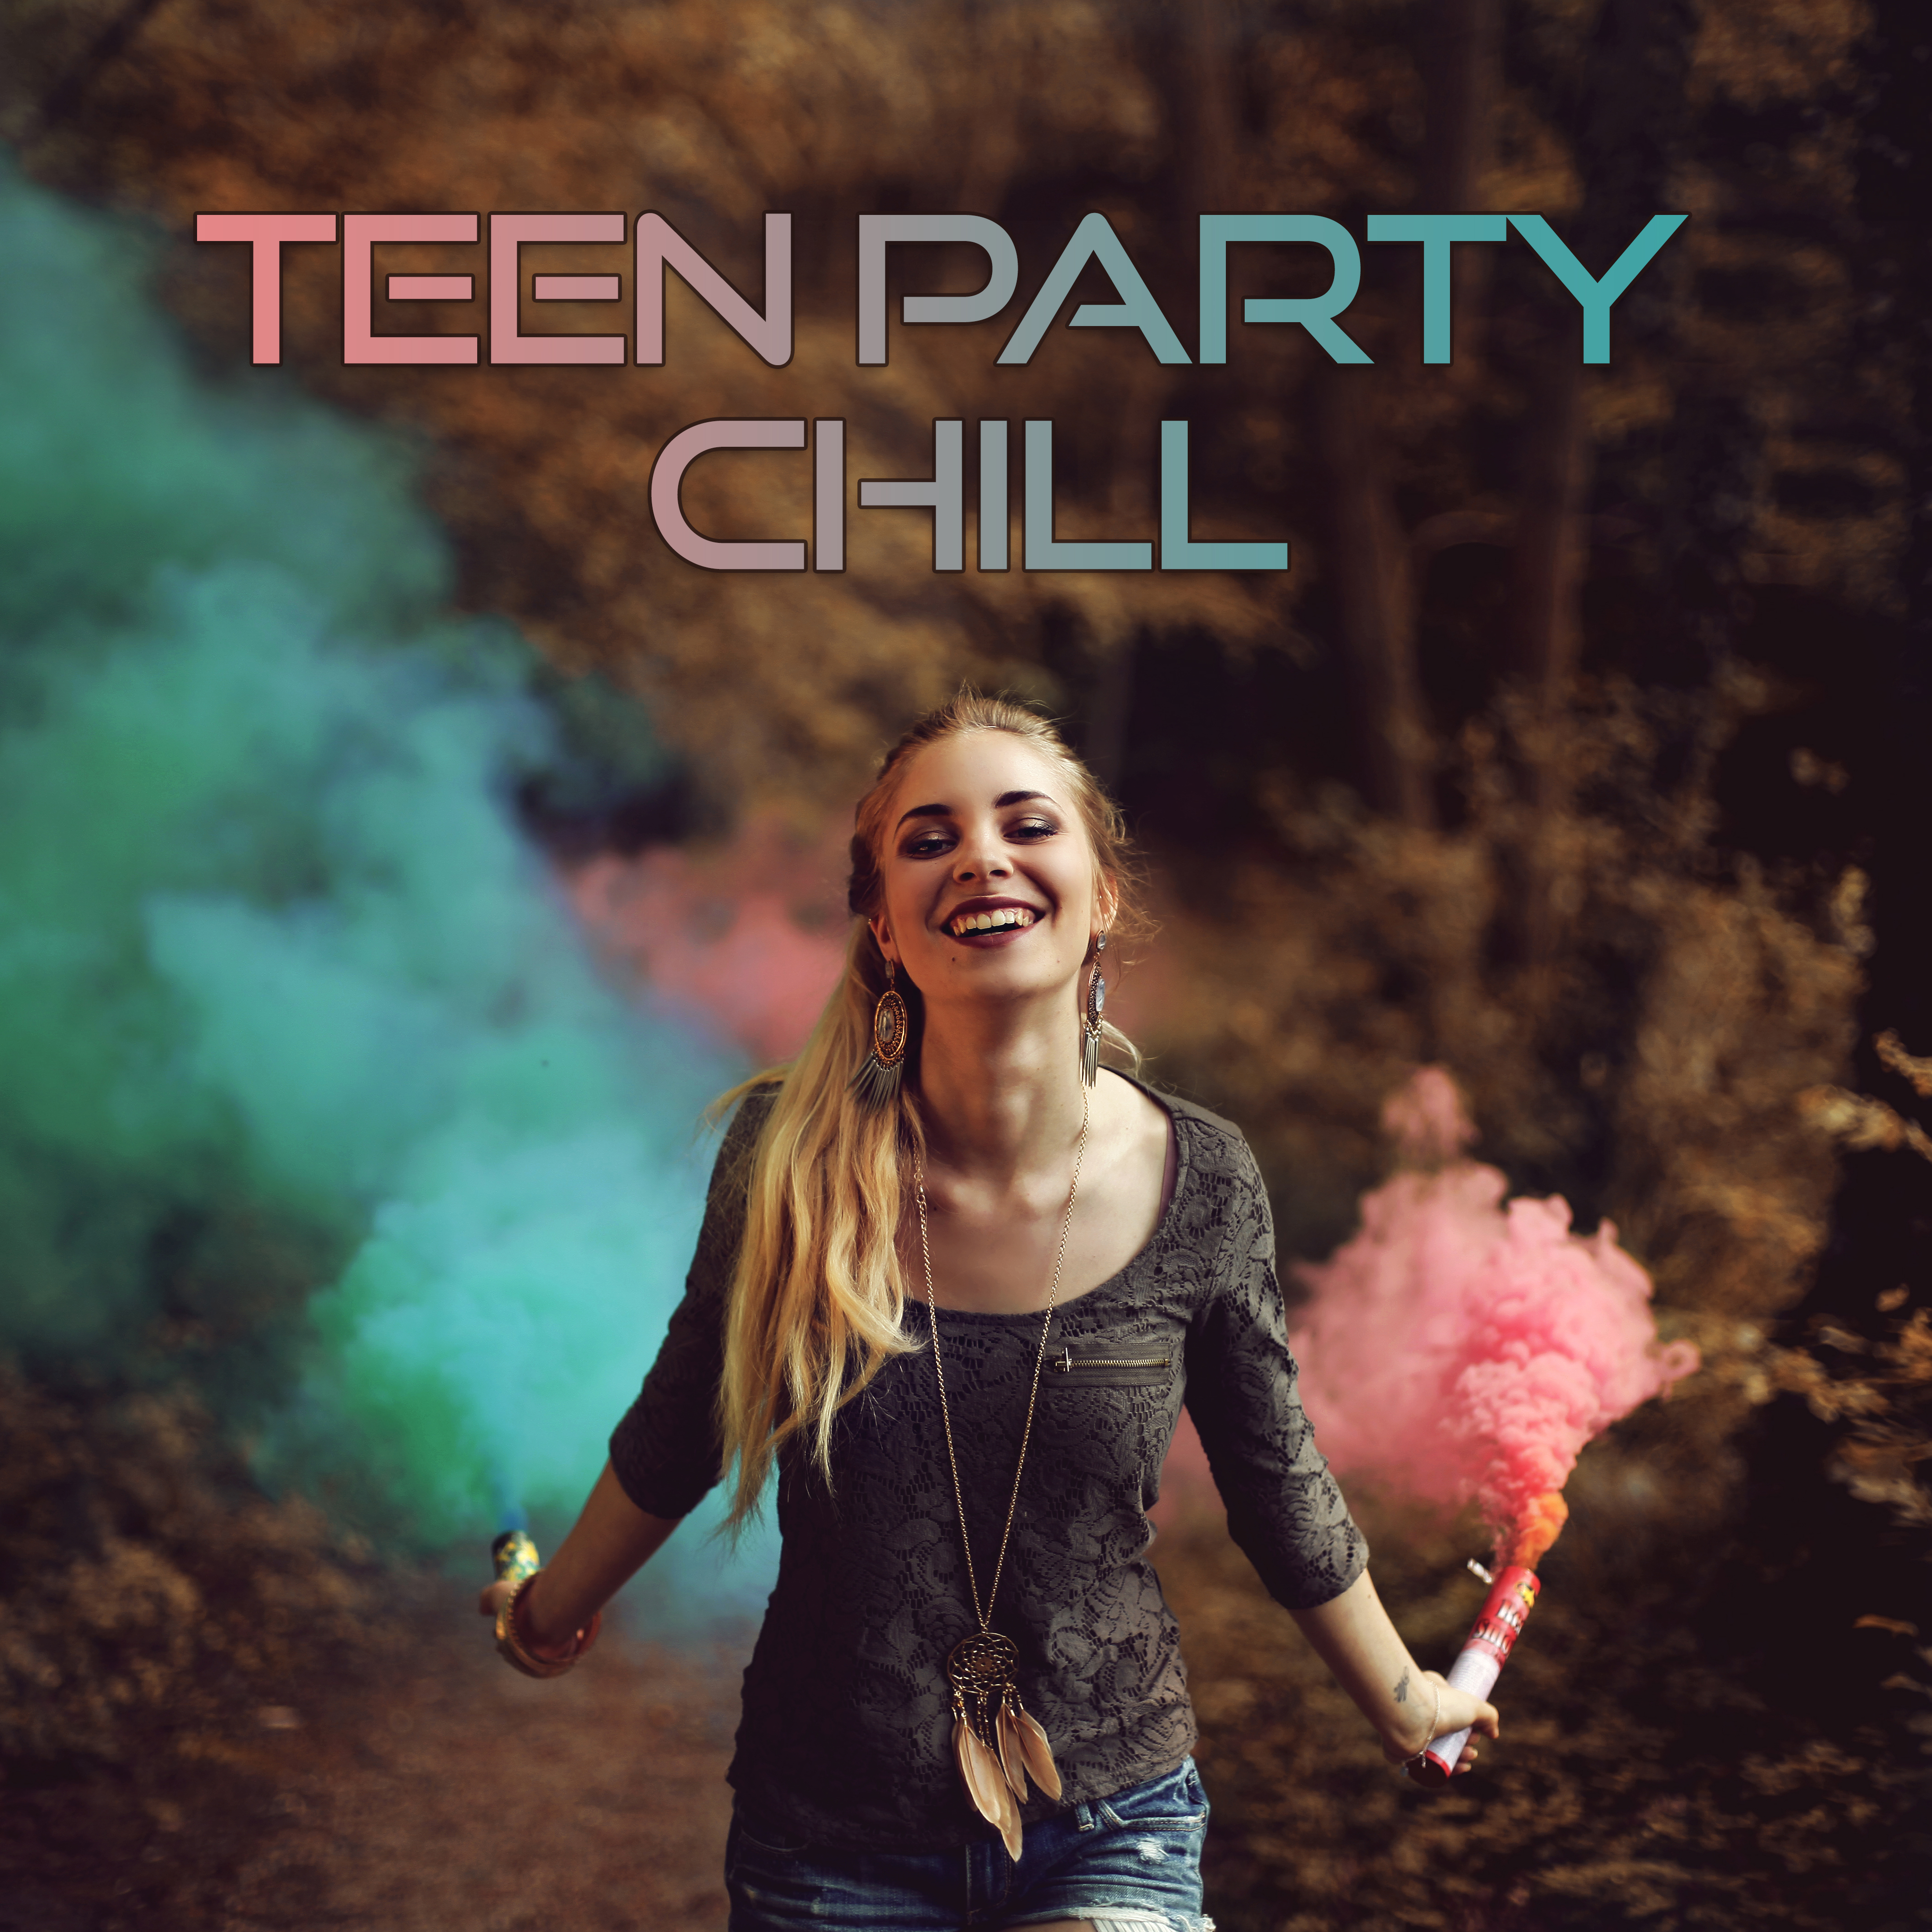 Teen Party Chill - Summer Chillout Party, Party Music, Ibiza Chill Out, Beach Music, Chill Out Music, Teen Music